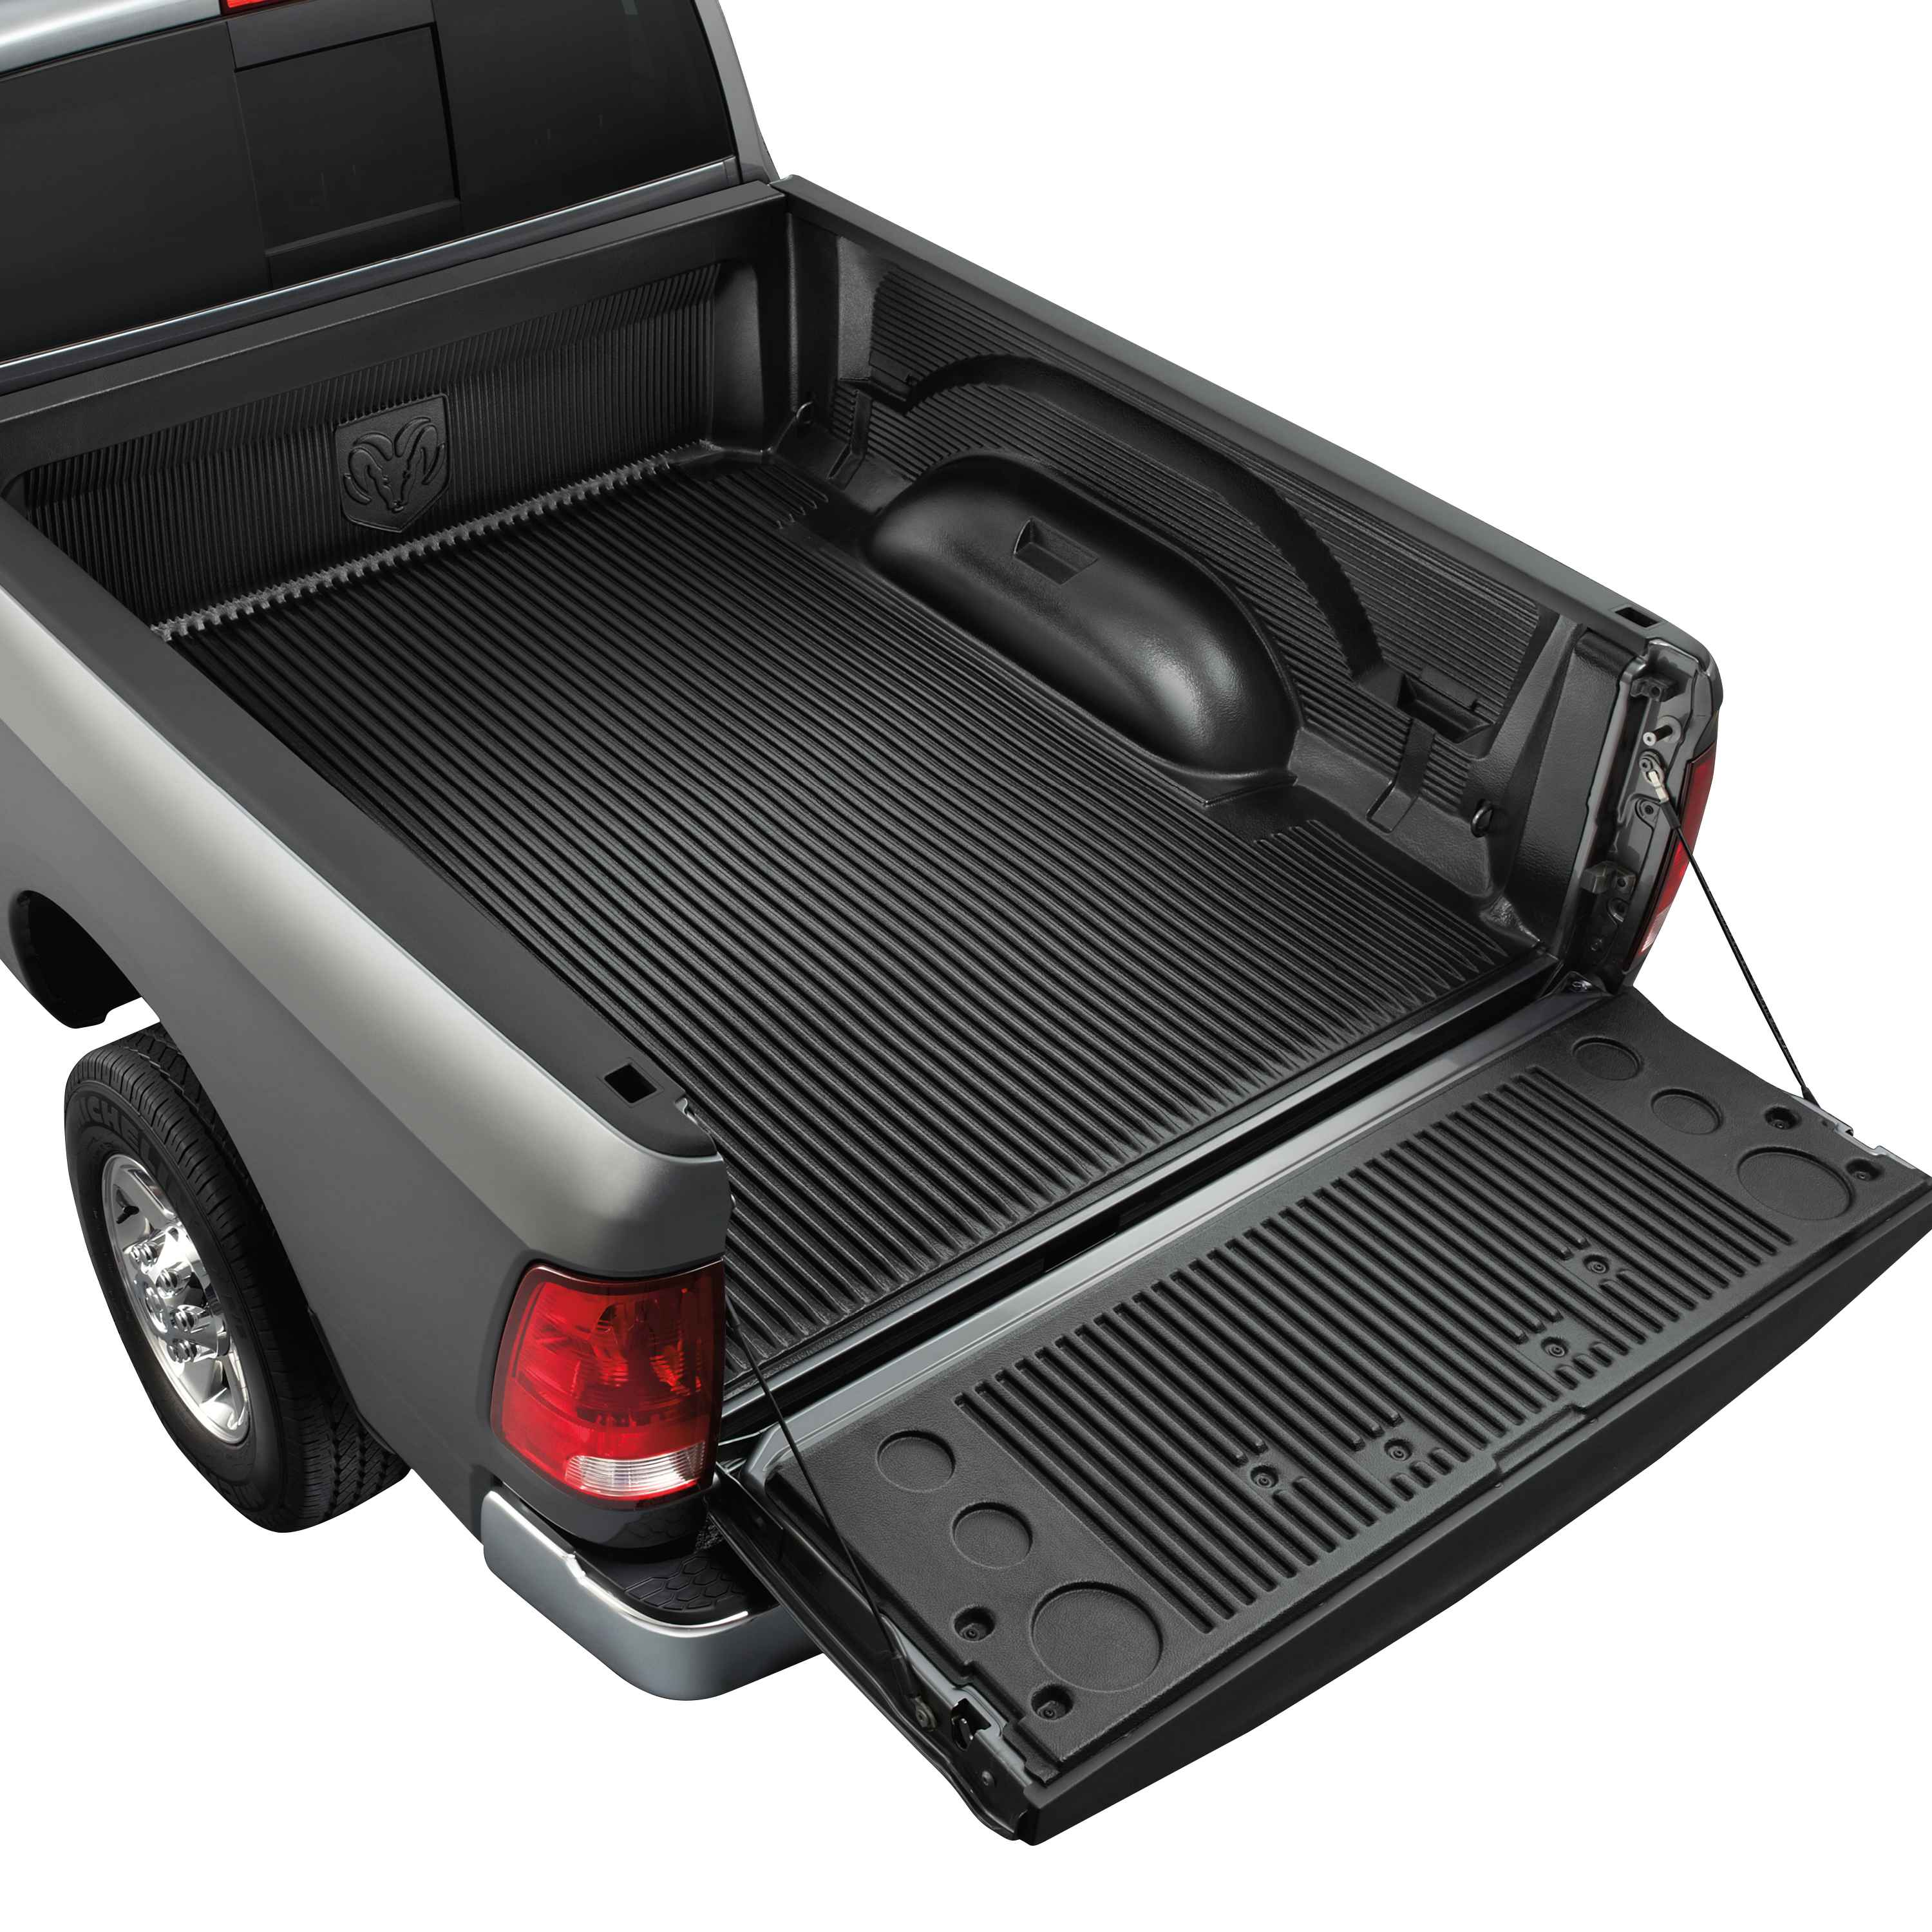 Drop-In Bedliner for 64 Conventional Bed